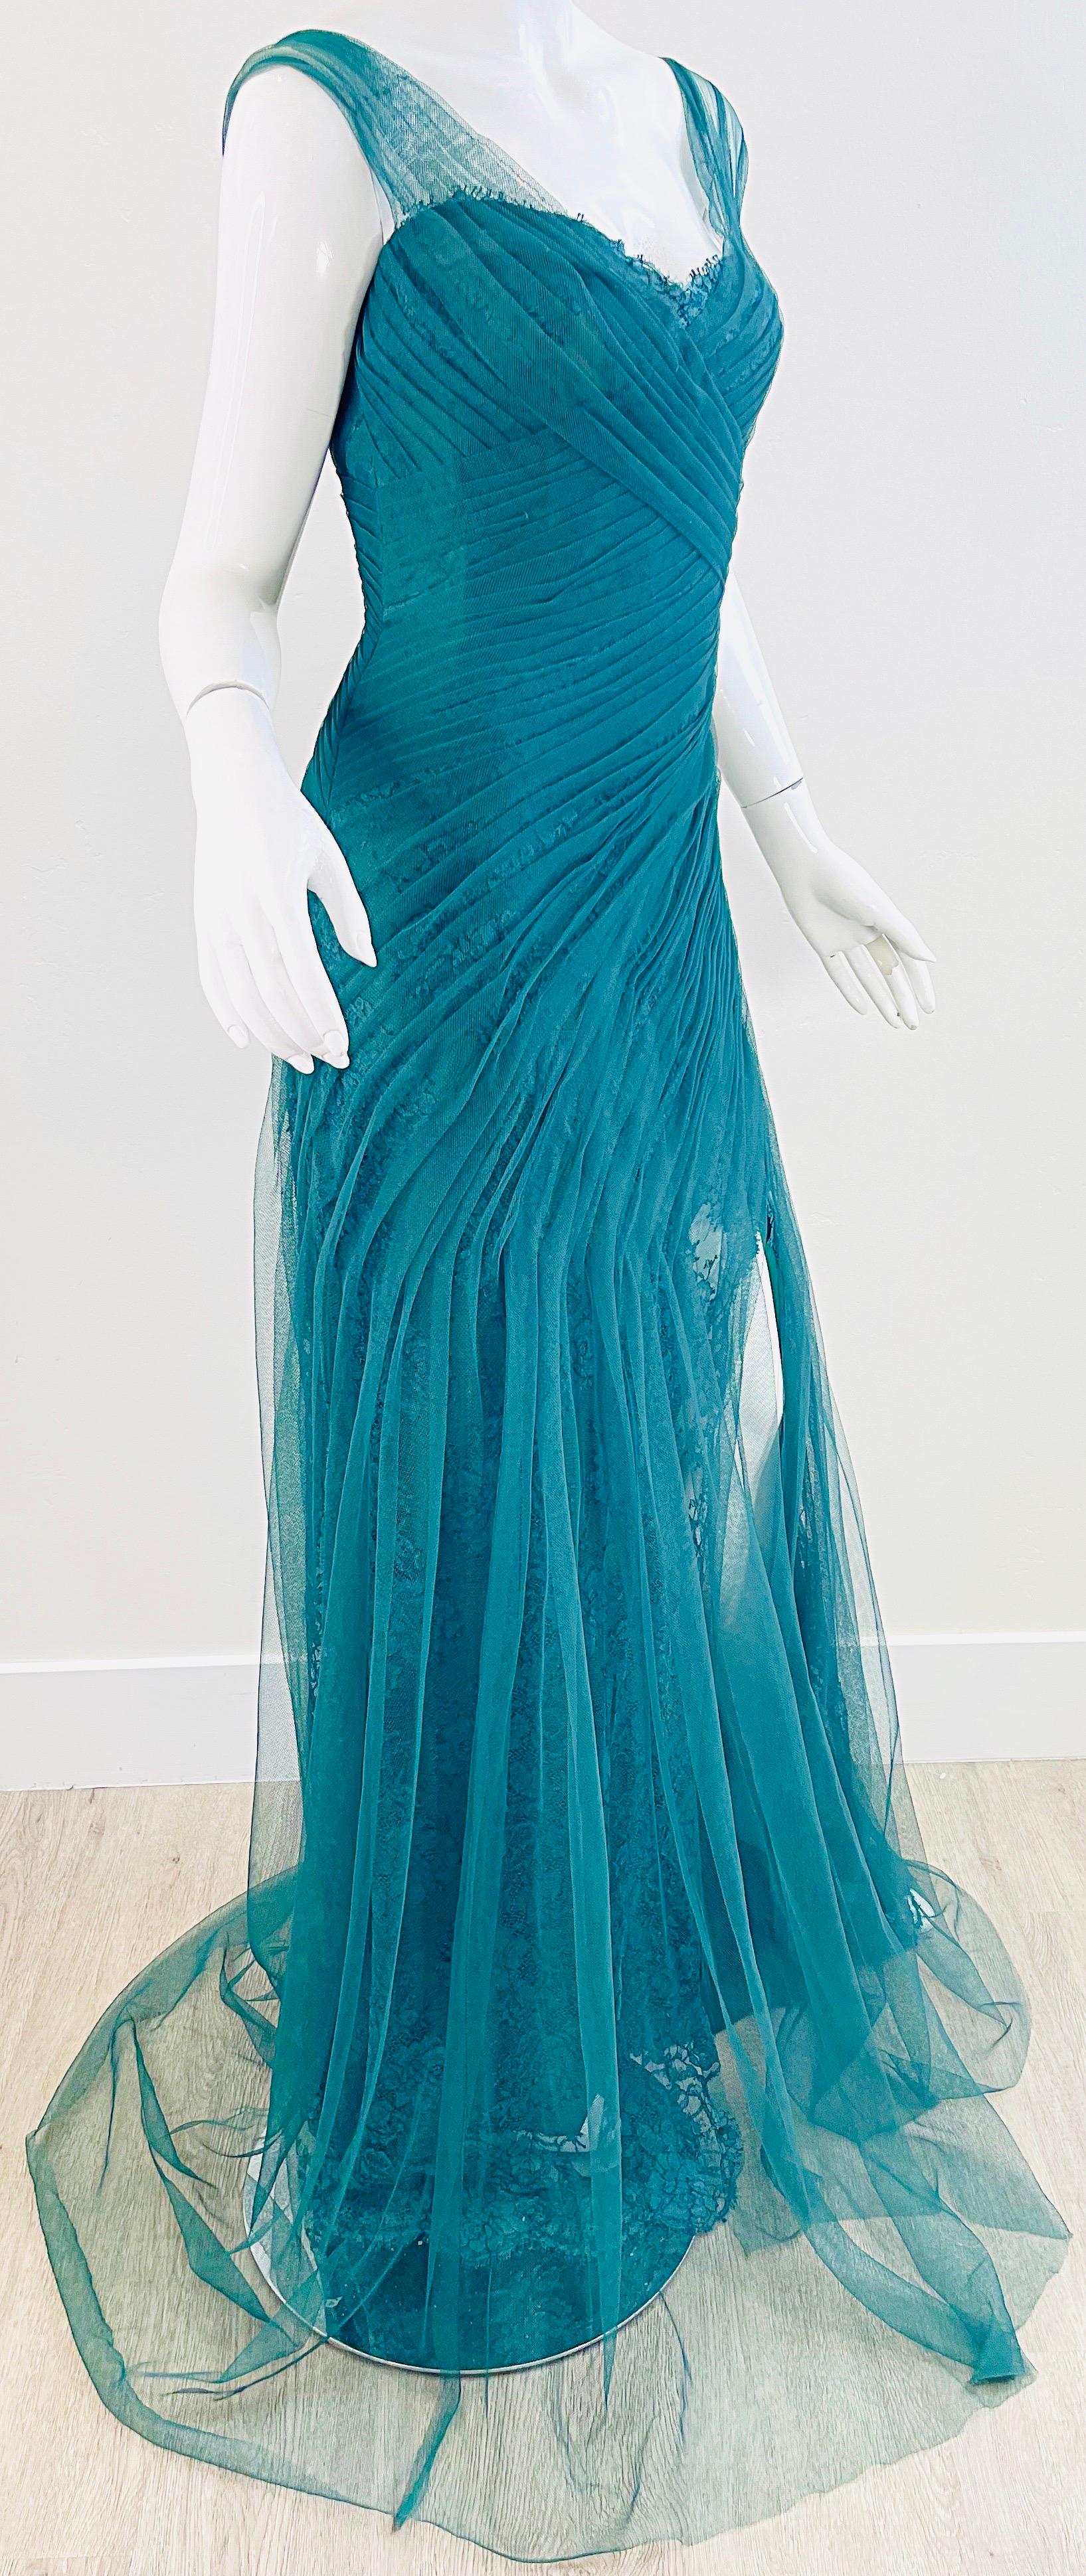 NWT Monique Lhuillier Runway Spring 2013 Size 4 Emerald Green Lace Gown Dress For Sale 6